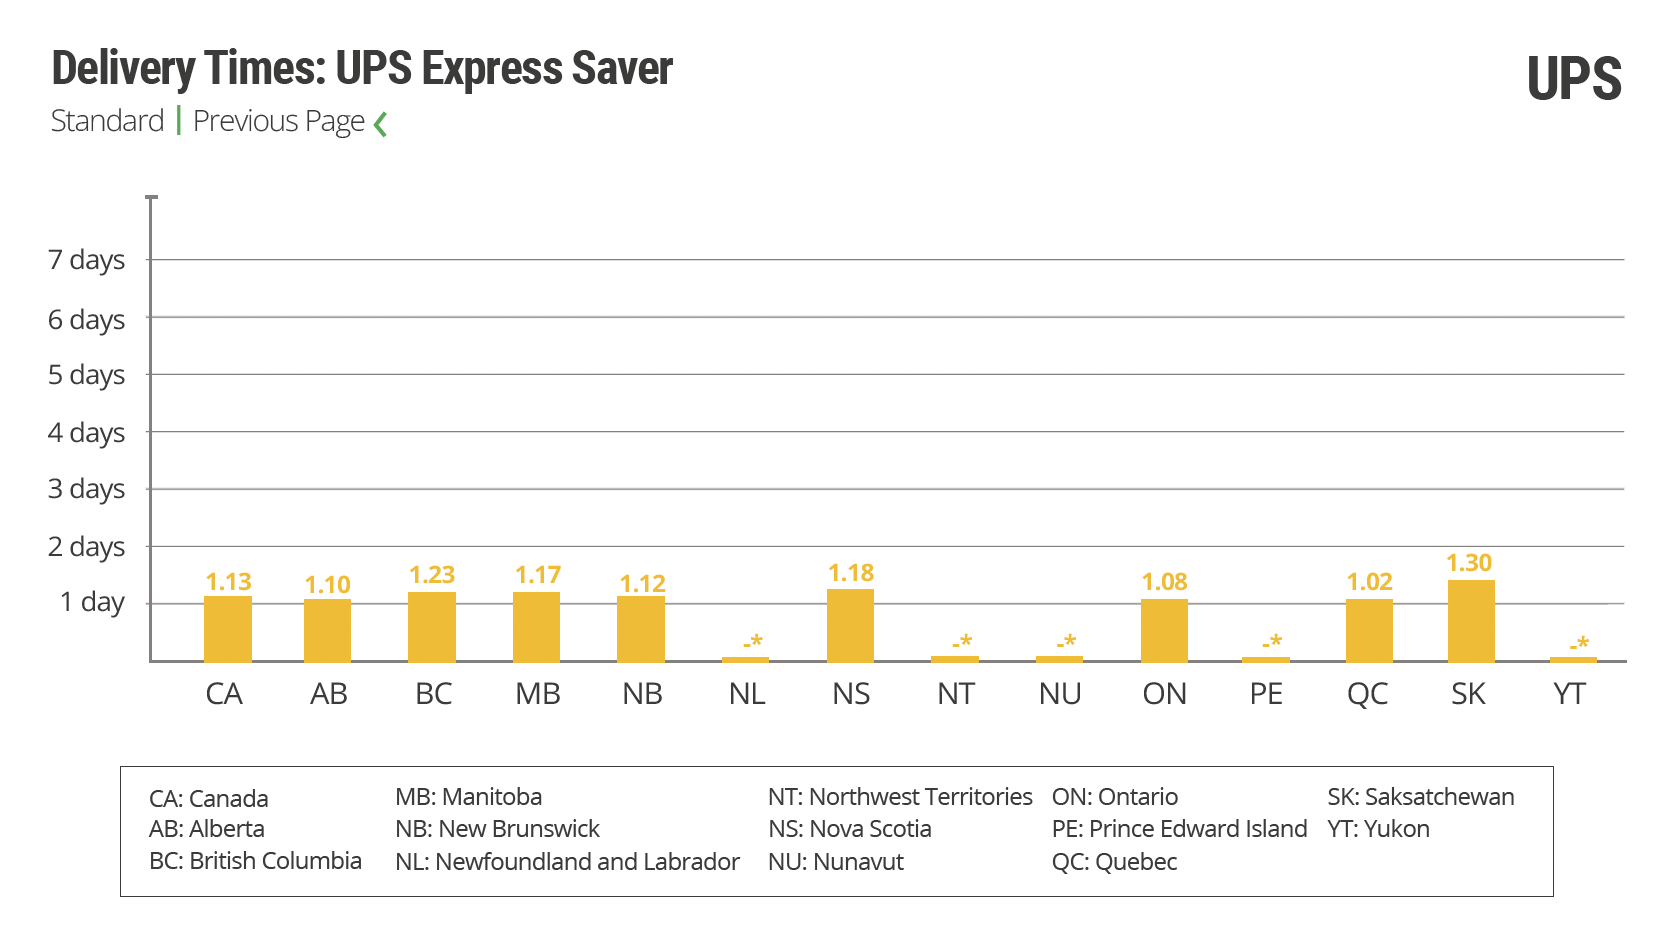 How fast is UPS Express Saver?